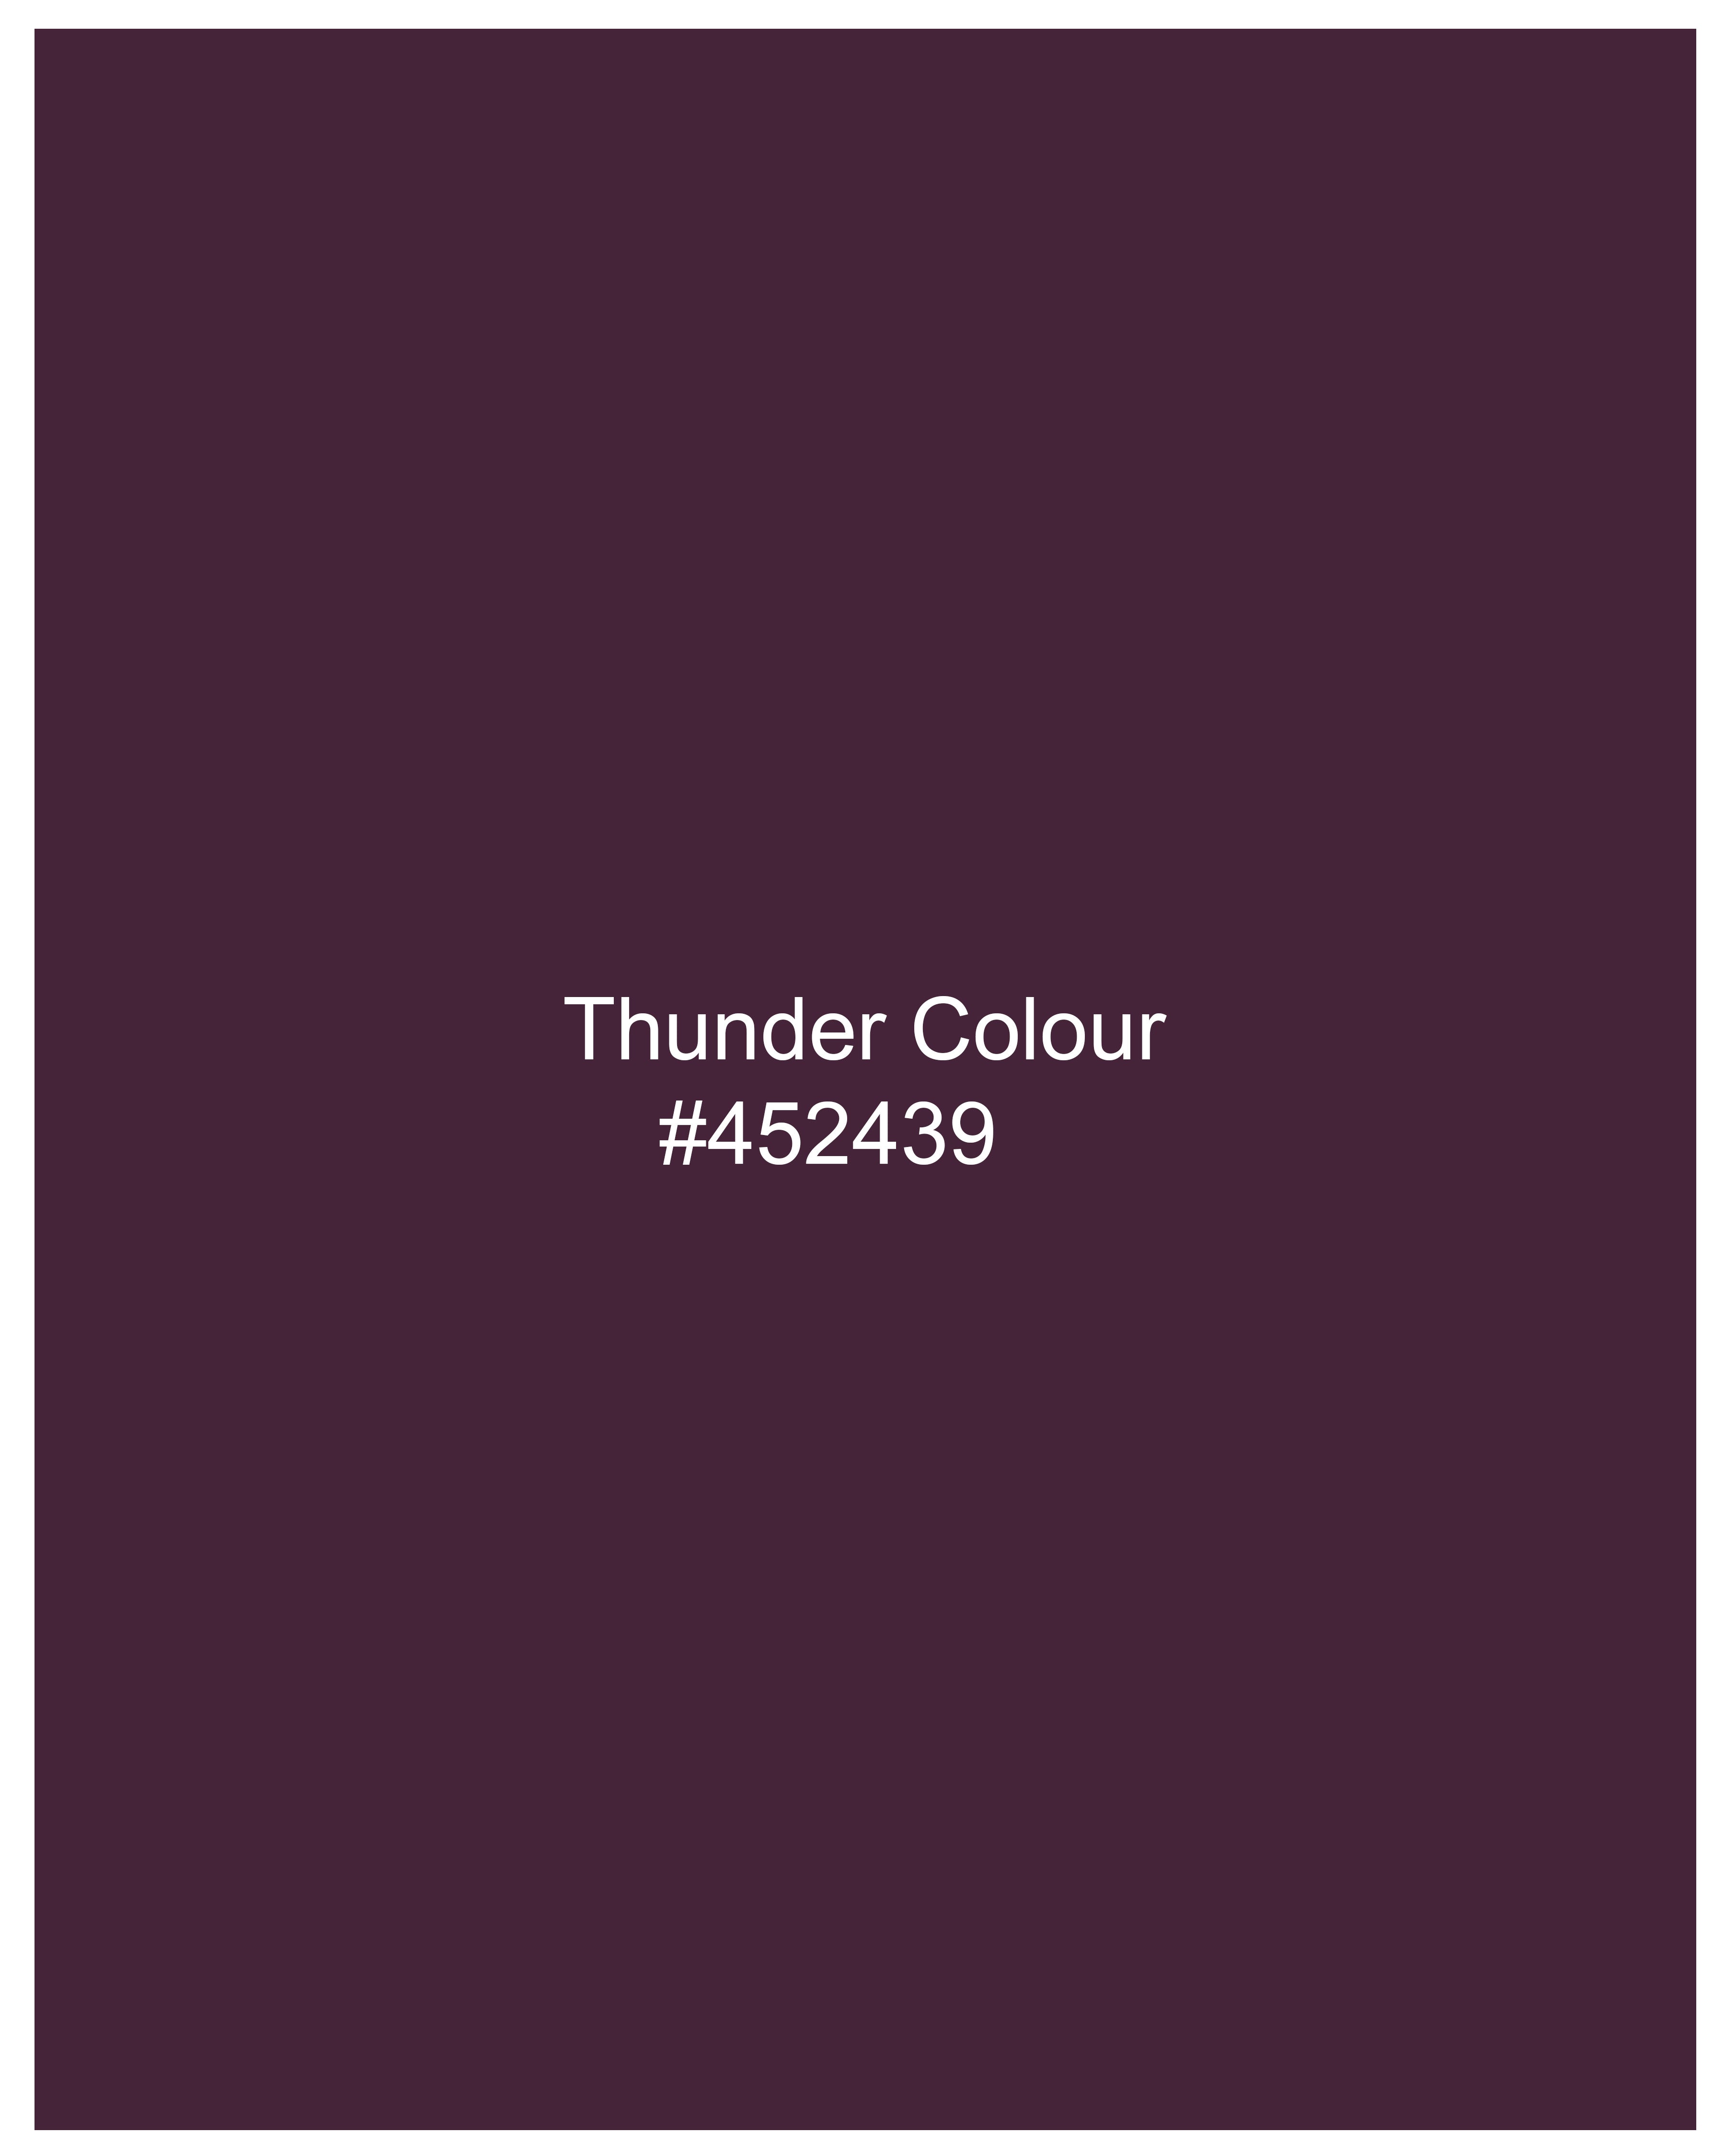 Thunder Maroon with Golden Piping Work Premium Cotton Designer Waistcoat V2365-36, V2365-38, V2365-40, V2365-42, V2365-44, V2365-46, V2365-48, V2365-50, V2365-52, V2365-54, V2365-56, V2365-58, V2365-60